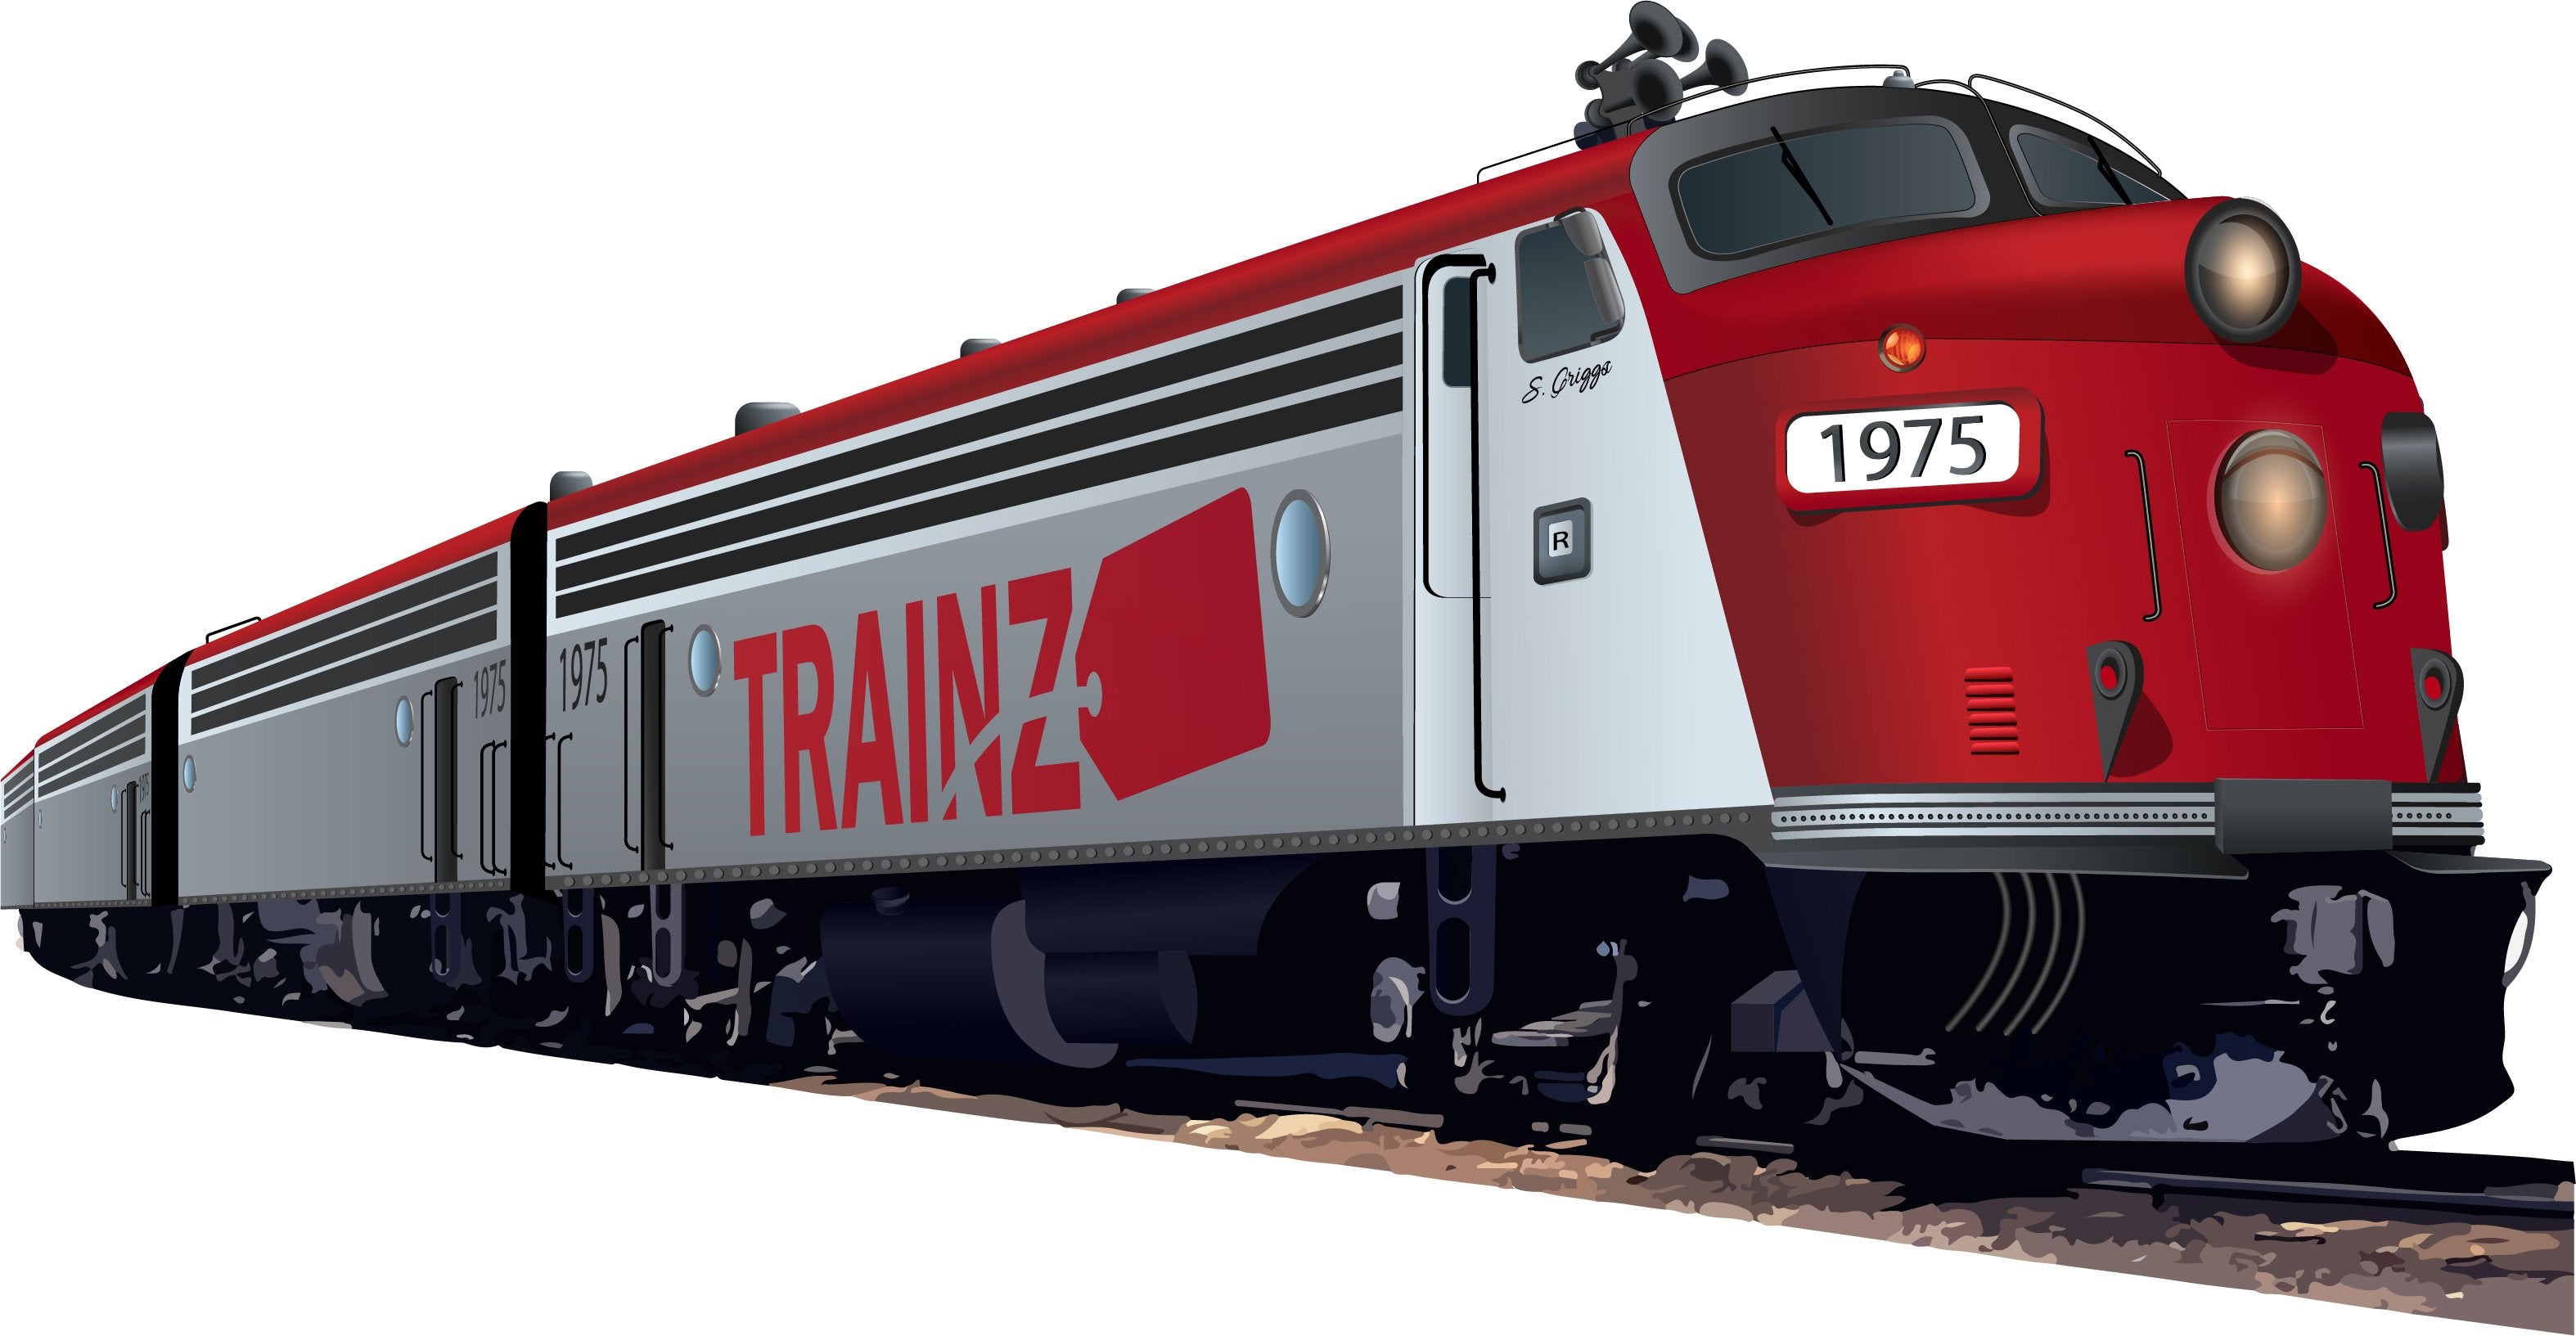 
      Trainz | Collectible Model Trains for Hobbyists
